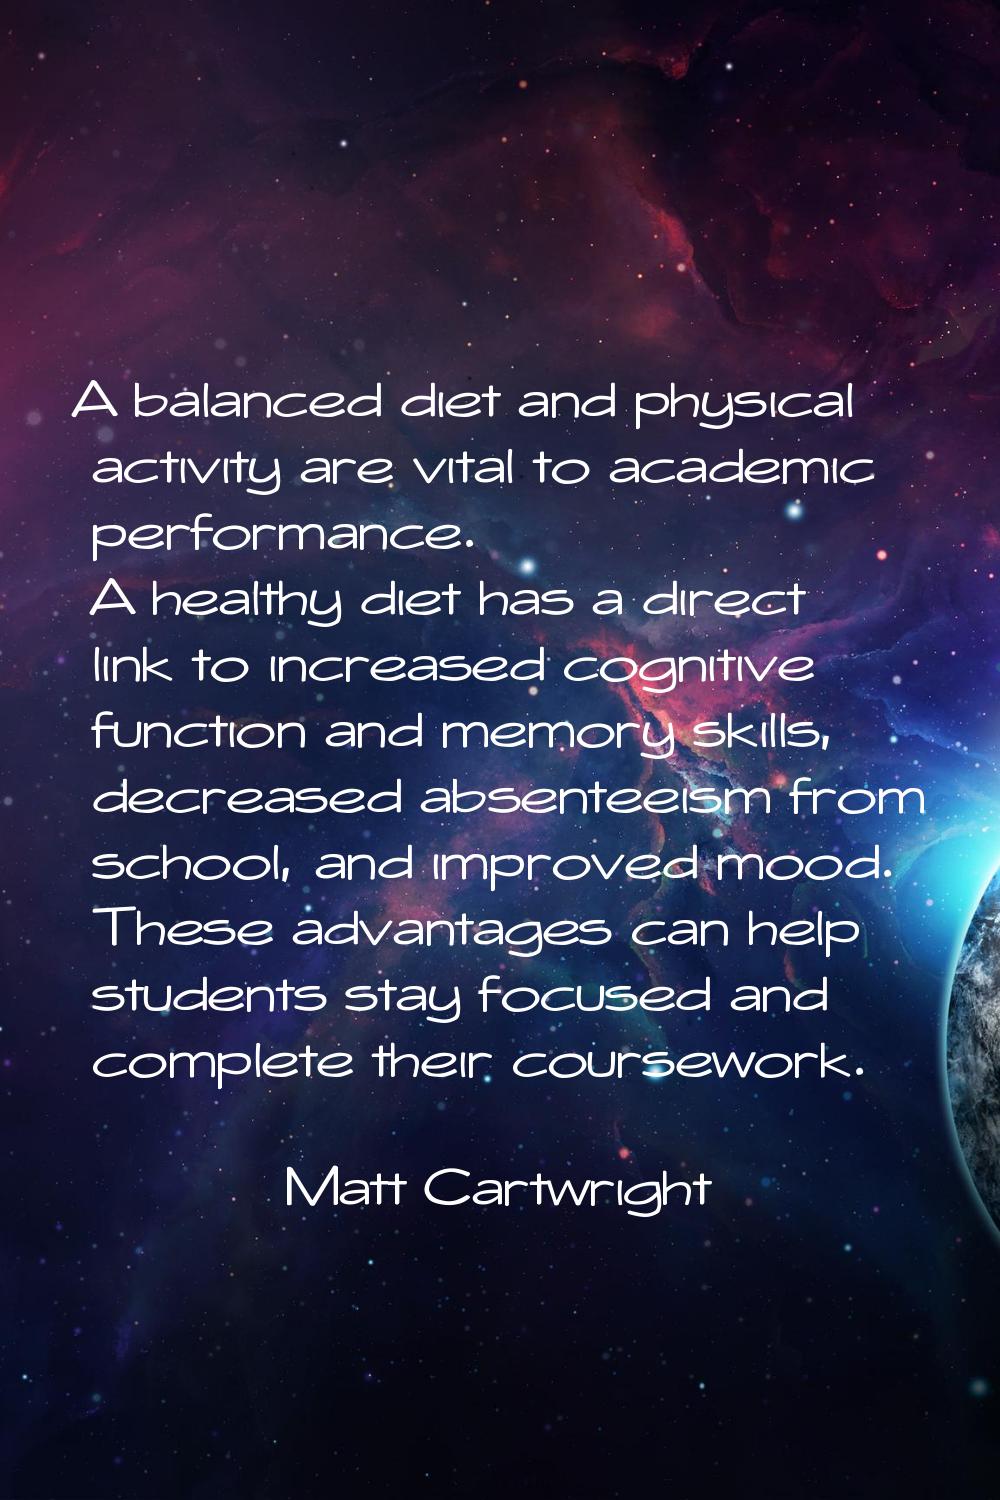 A balanced diet and physical activity are vital to academic performance. A healthy diet has a direc